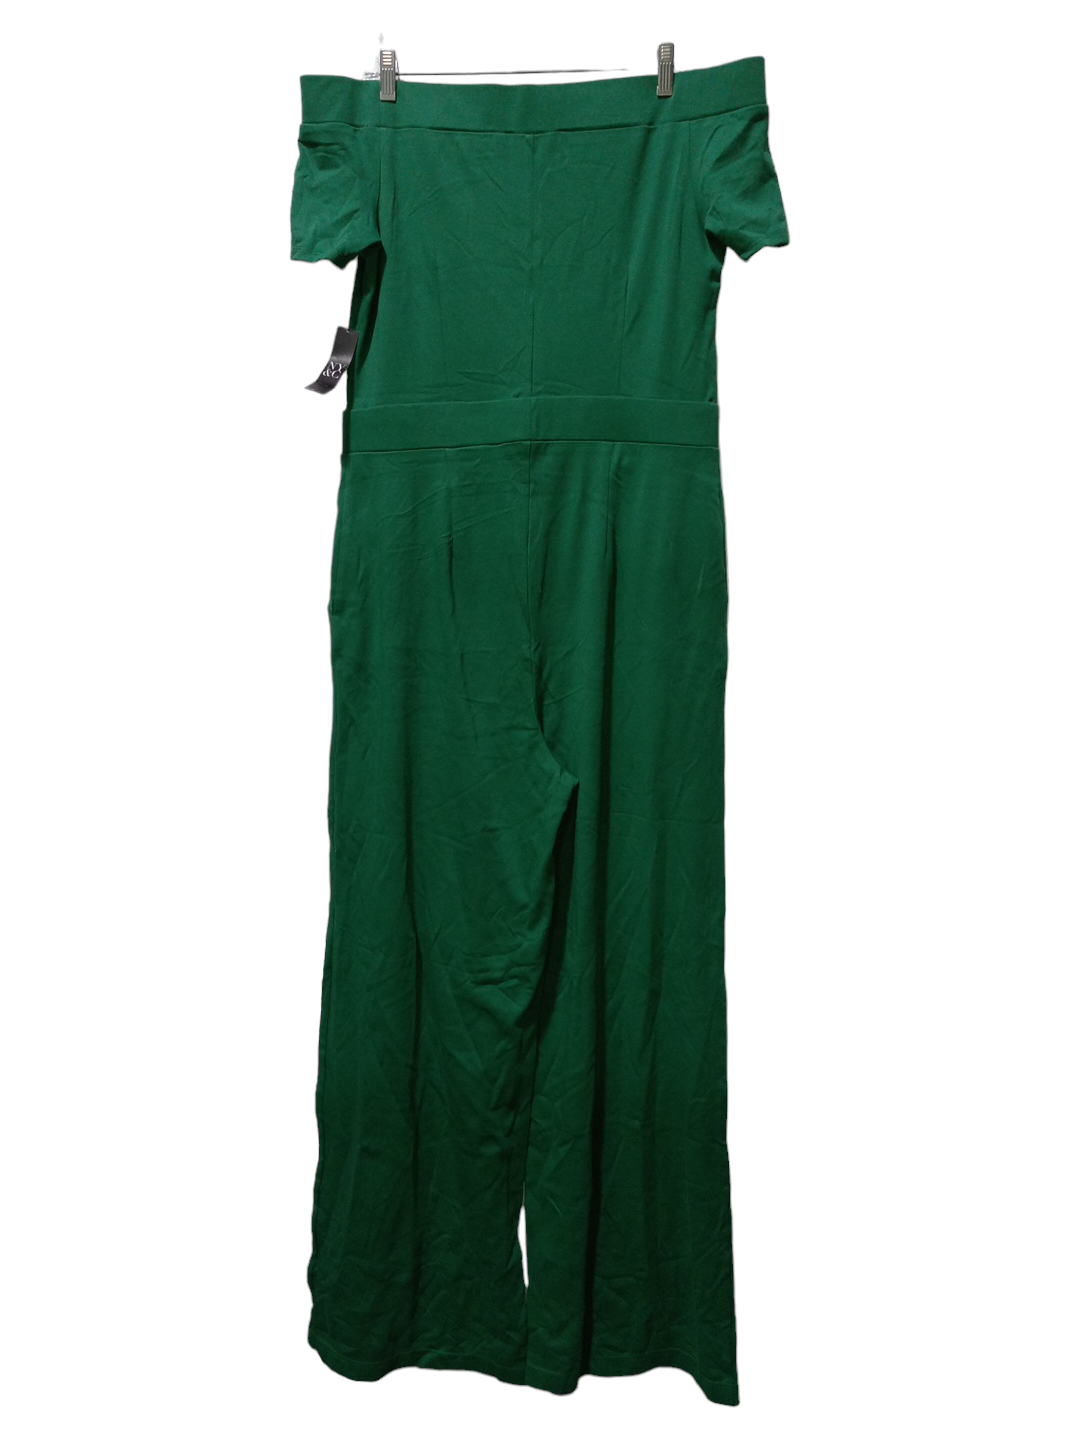 Green Jumpsuit New York And Co, Size L